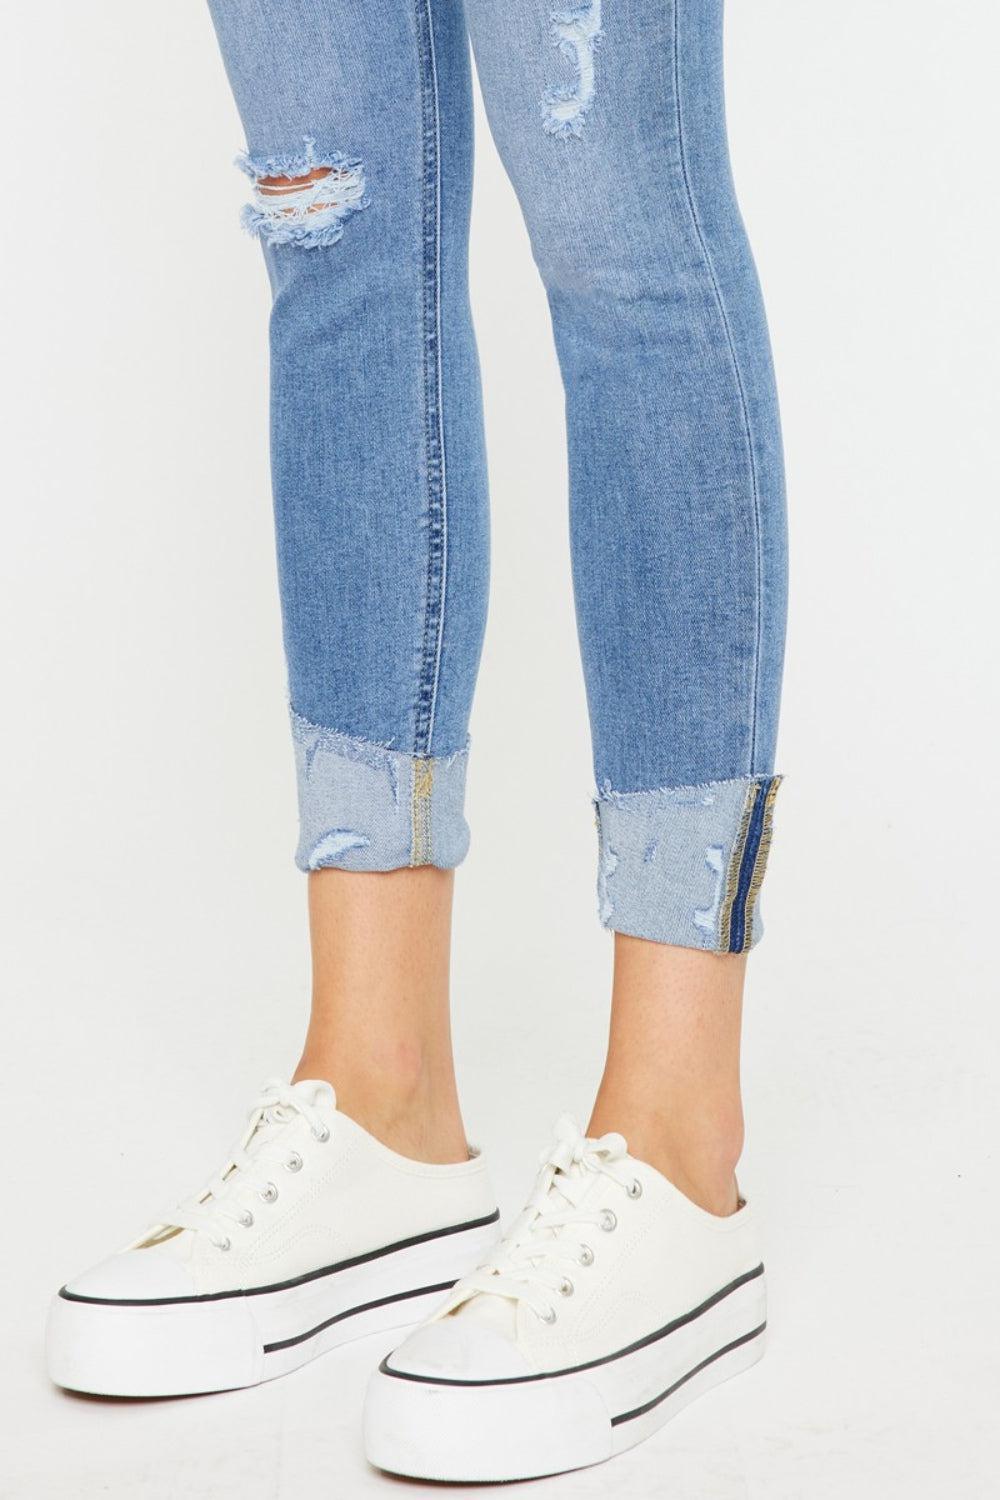 a woman wearing ripped jeans and white sneakers